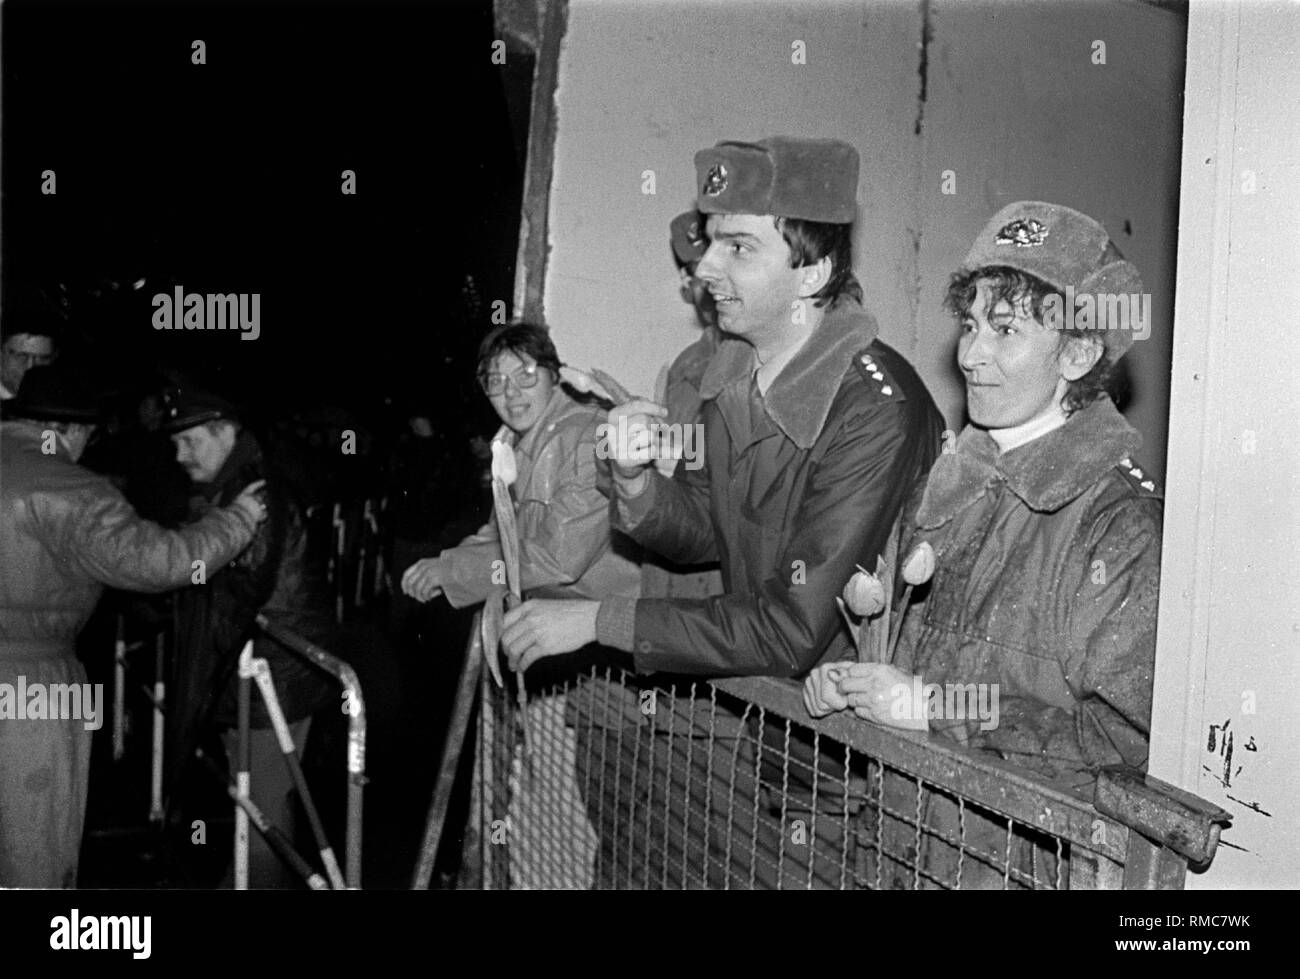 Germany, Berlin, December 22, 1989: opening of the Wall at the Brandenburg Gate. Border guards (inside) with flowers. Stock Photo